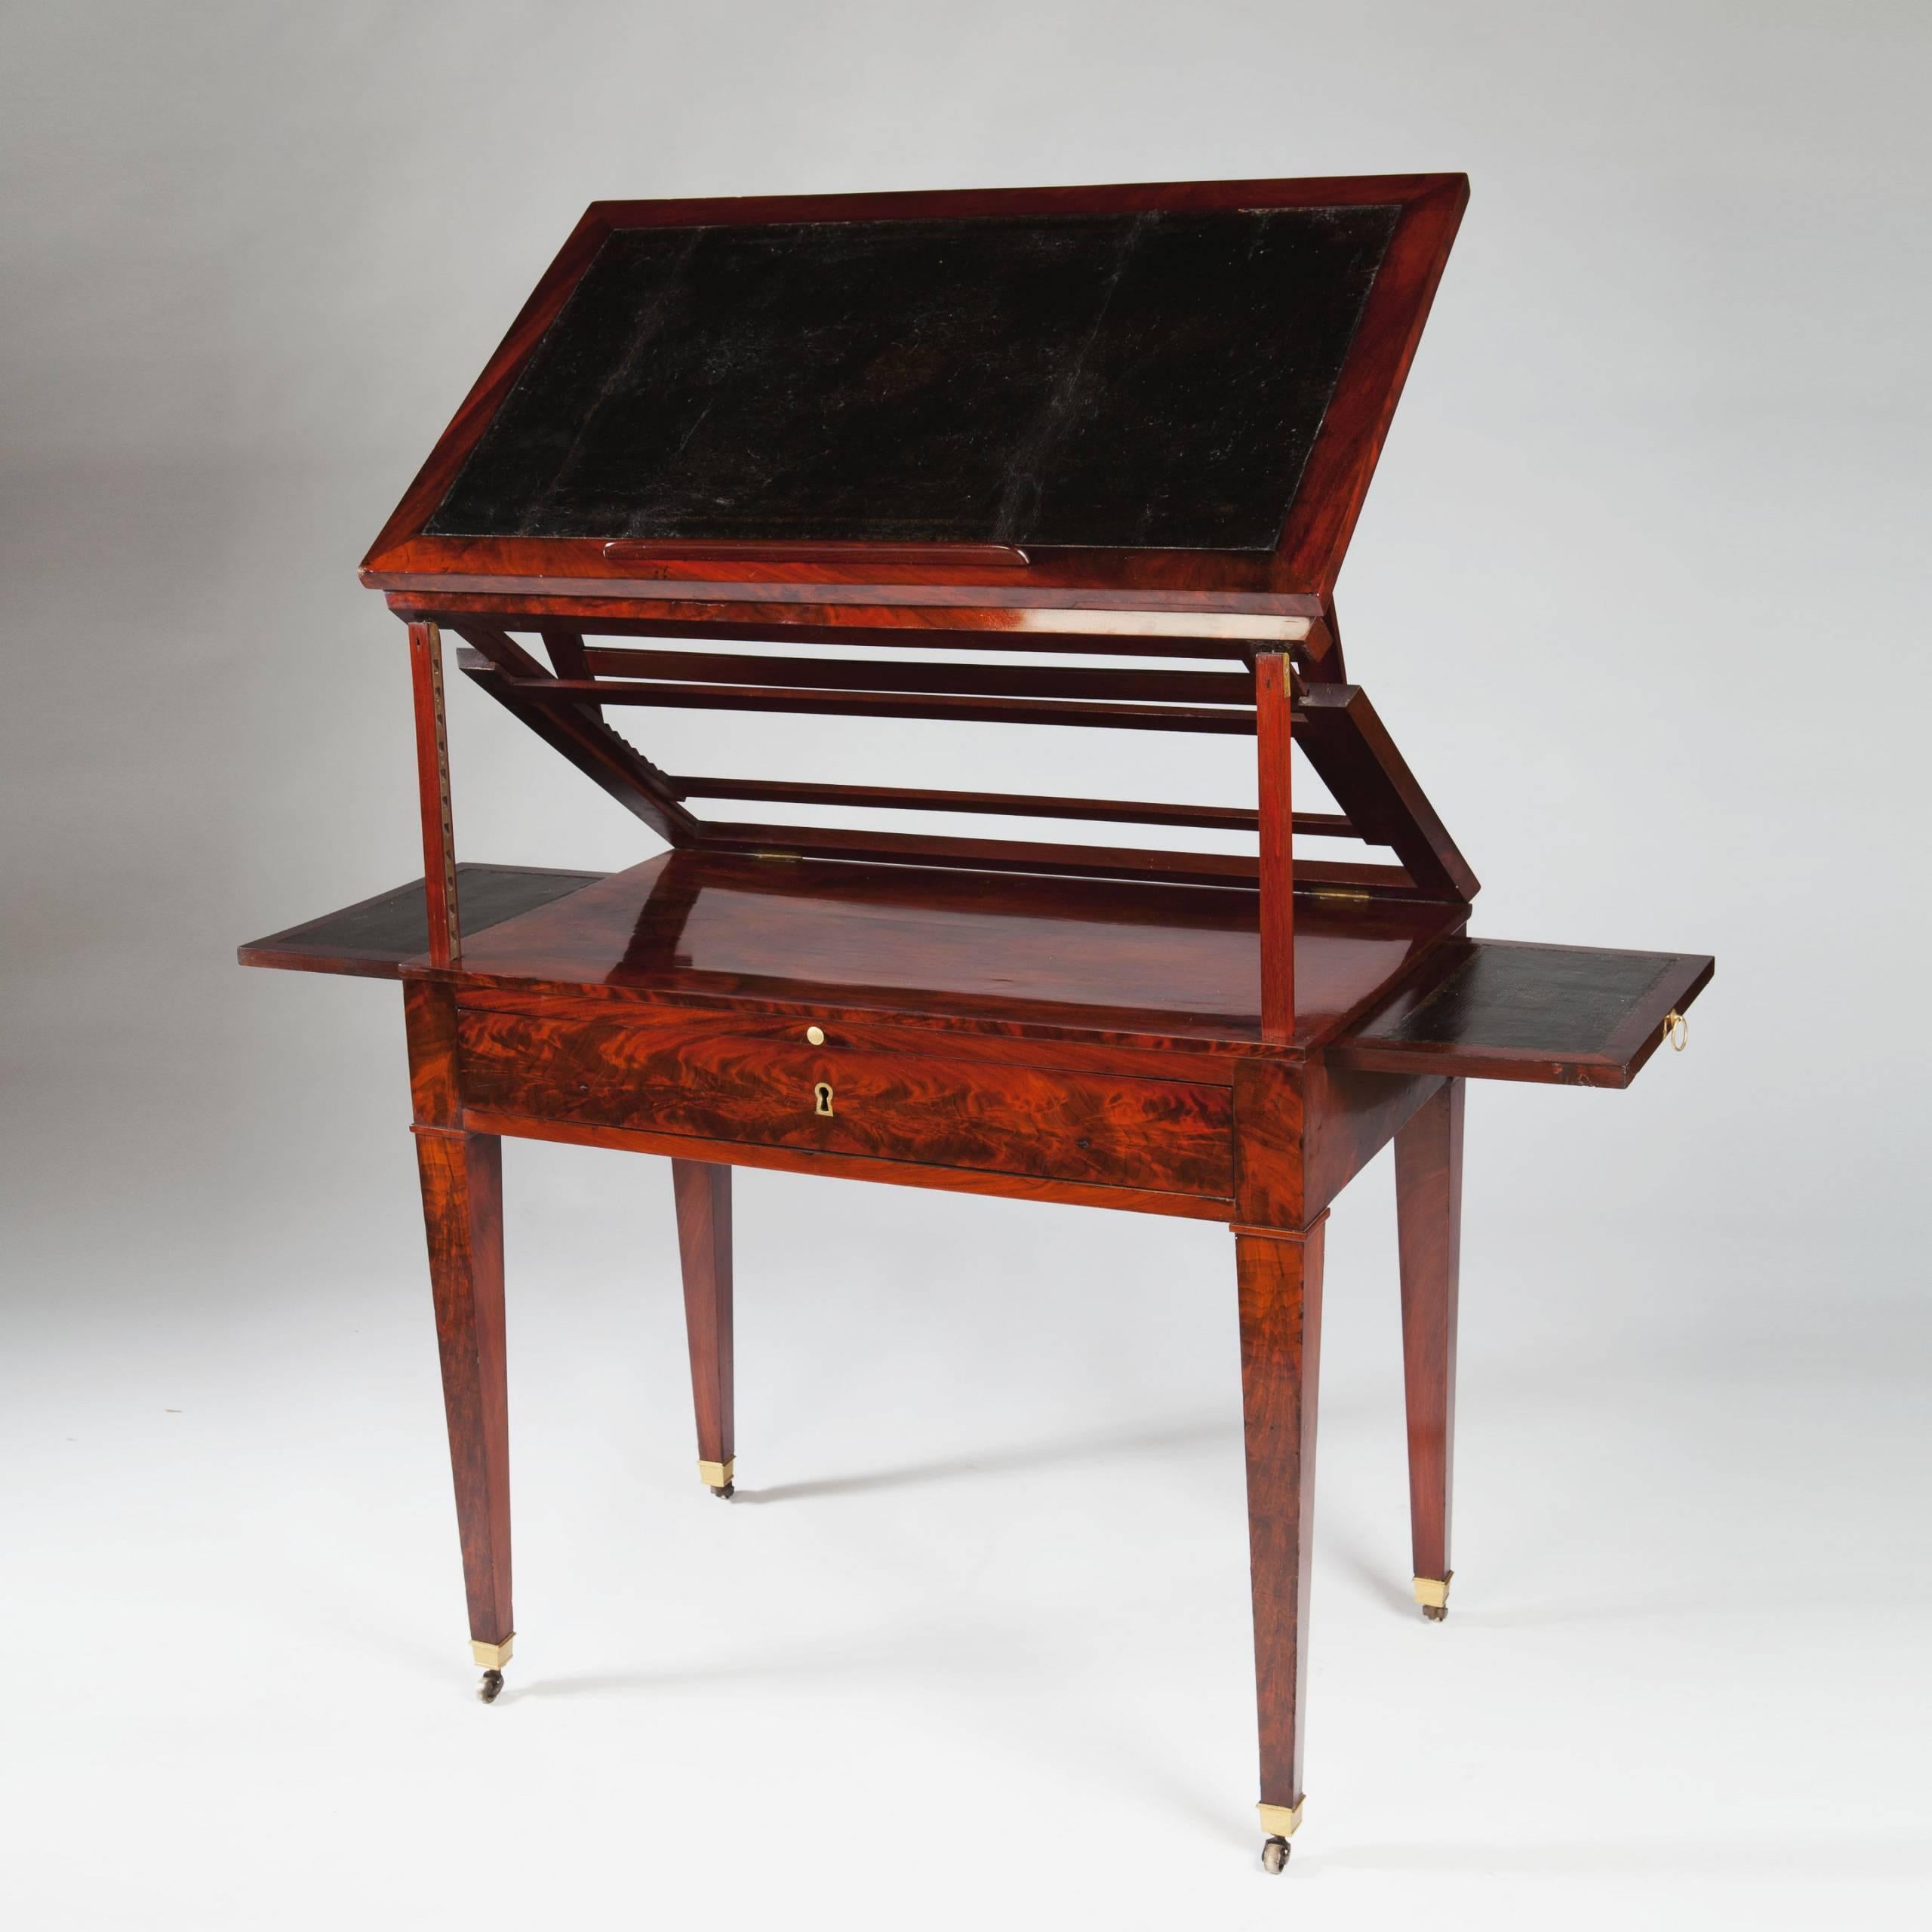 France, circa 1800.

A rare and highly figured early 19th century flame mahogany architects table 